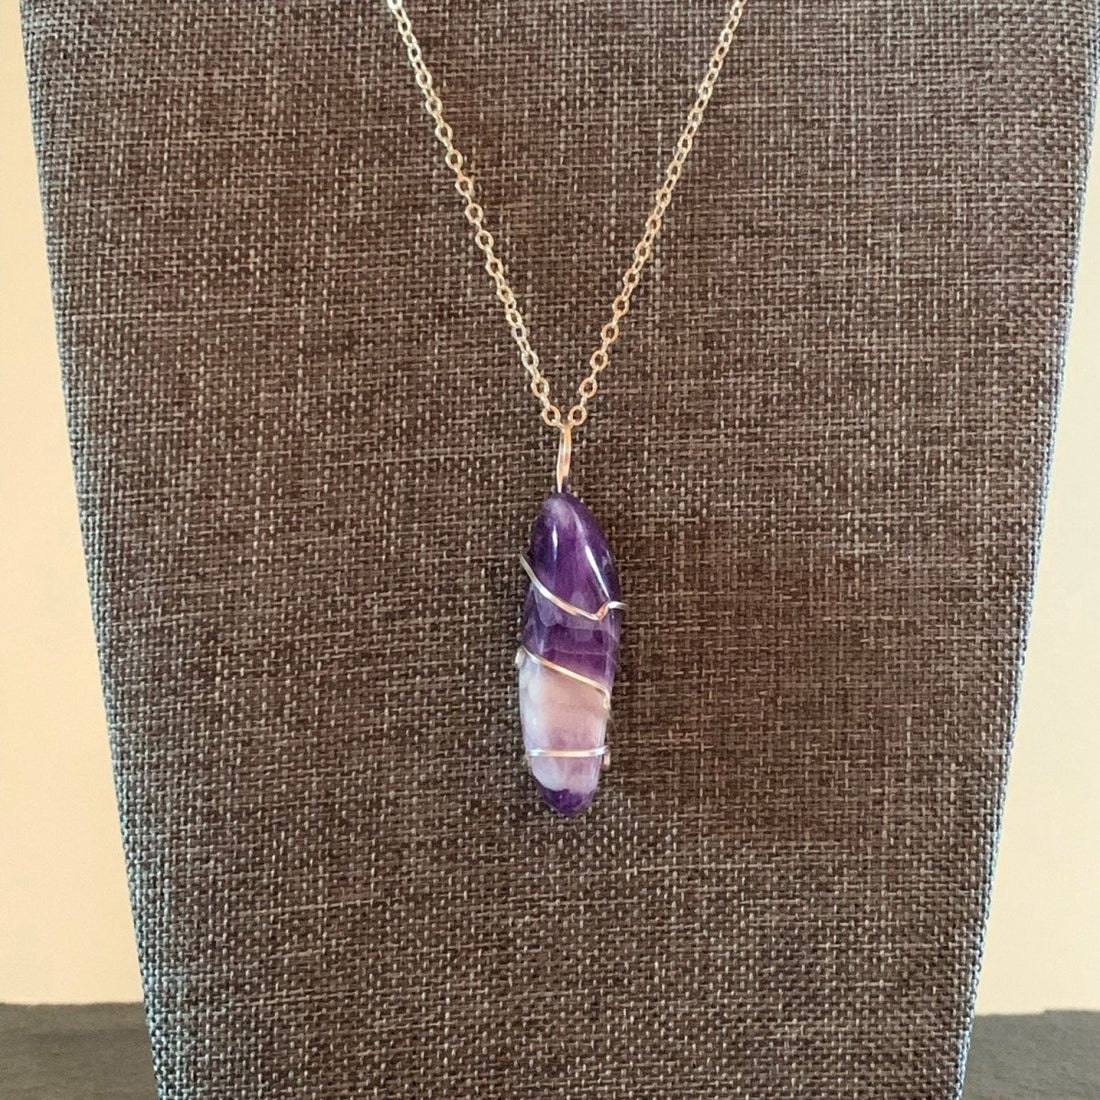 Pendant made of Chevron Amethyst long nugget with silver wrap; 1/2" w x 1 7/8" h, incl bail